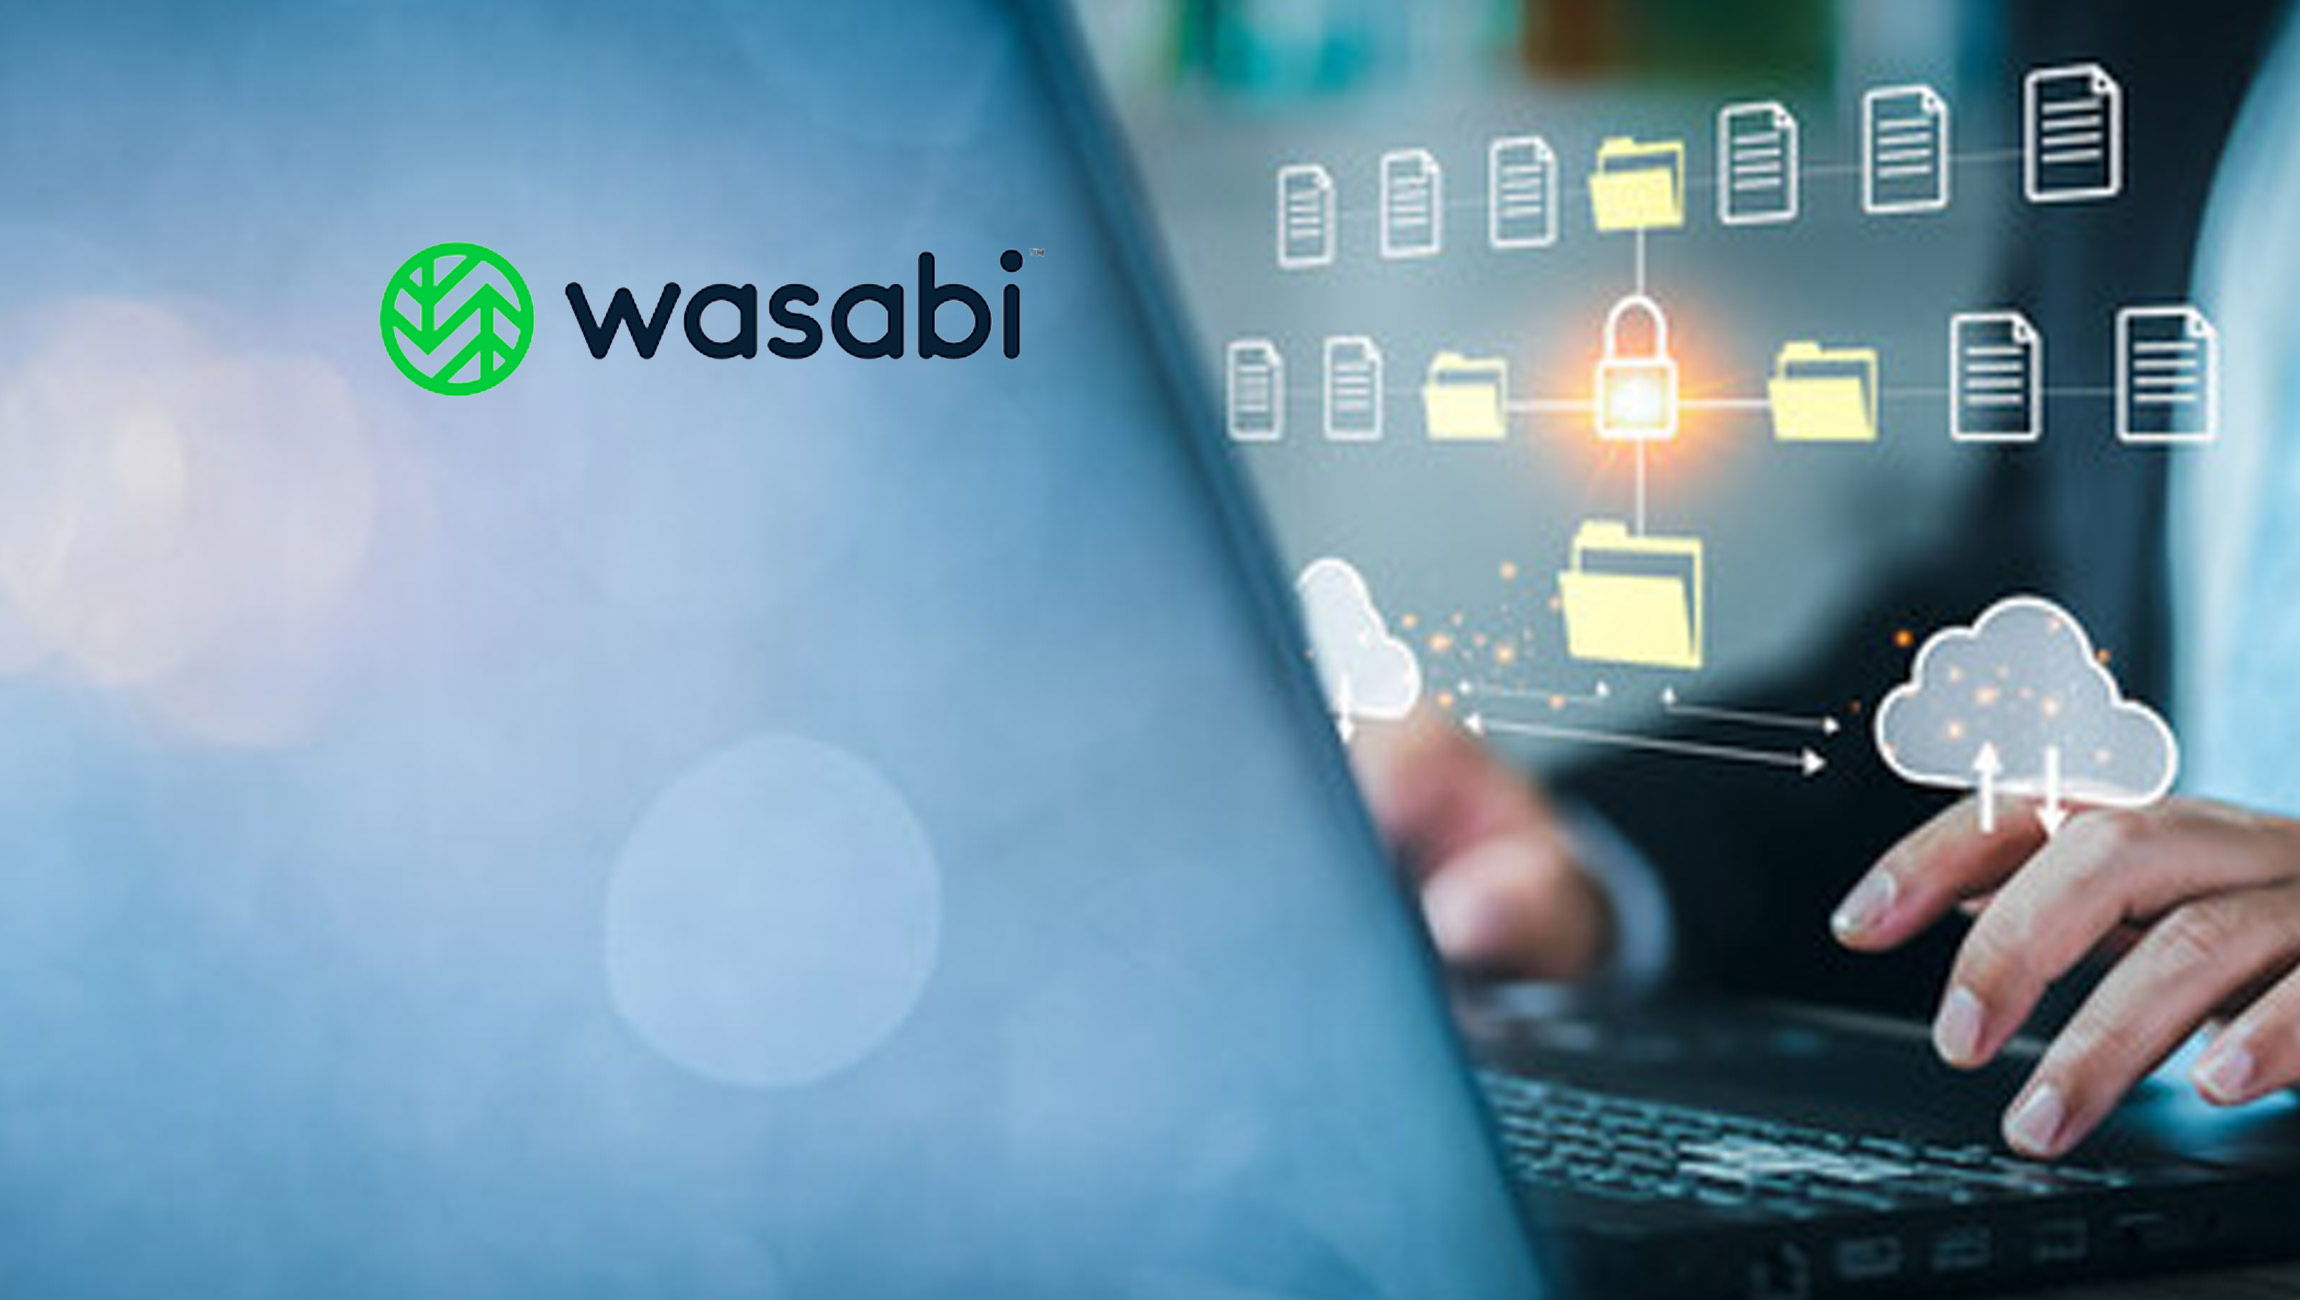 Public Cloud Spend Shows No Fear of Recession, According to Wasabi 2023 Global Cloud Storage Index